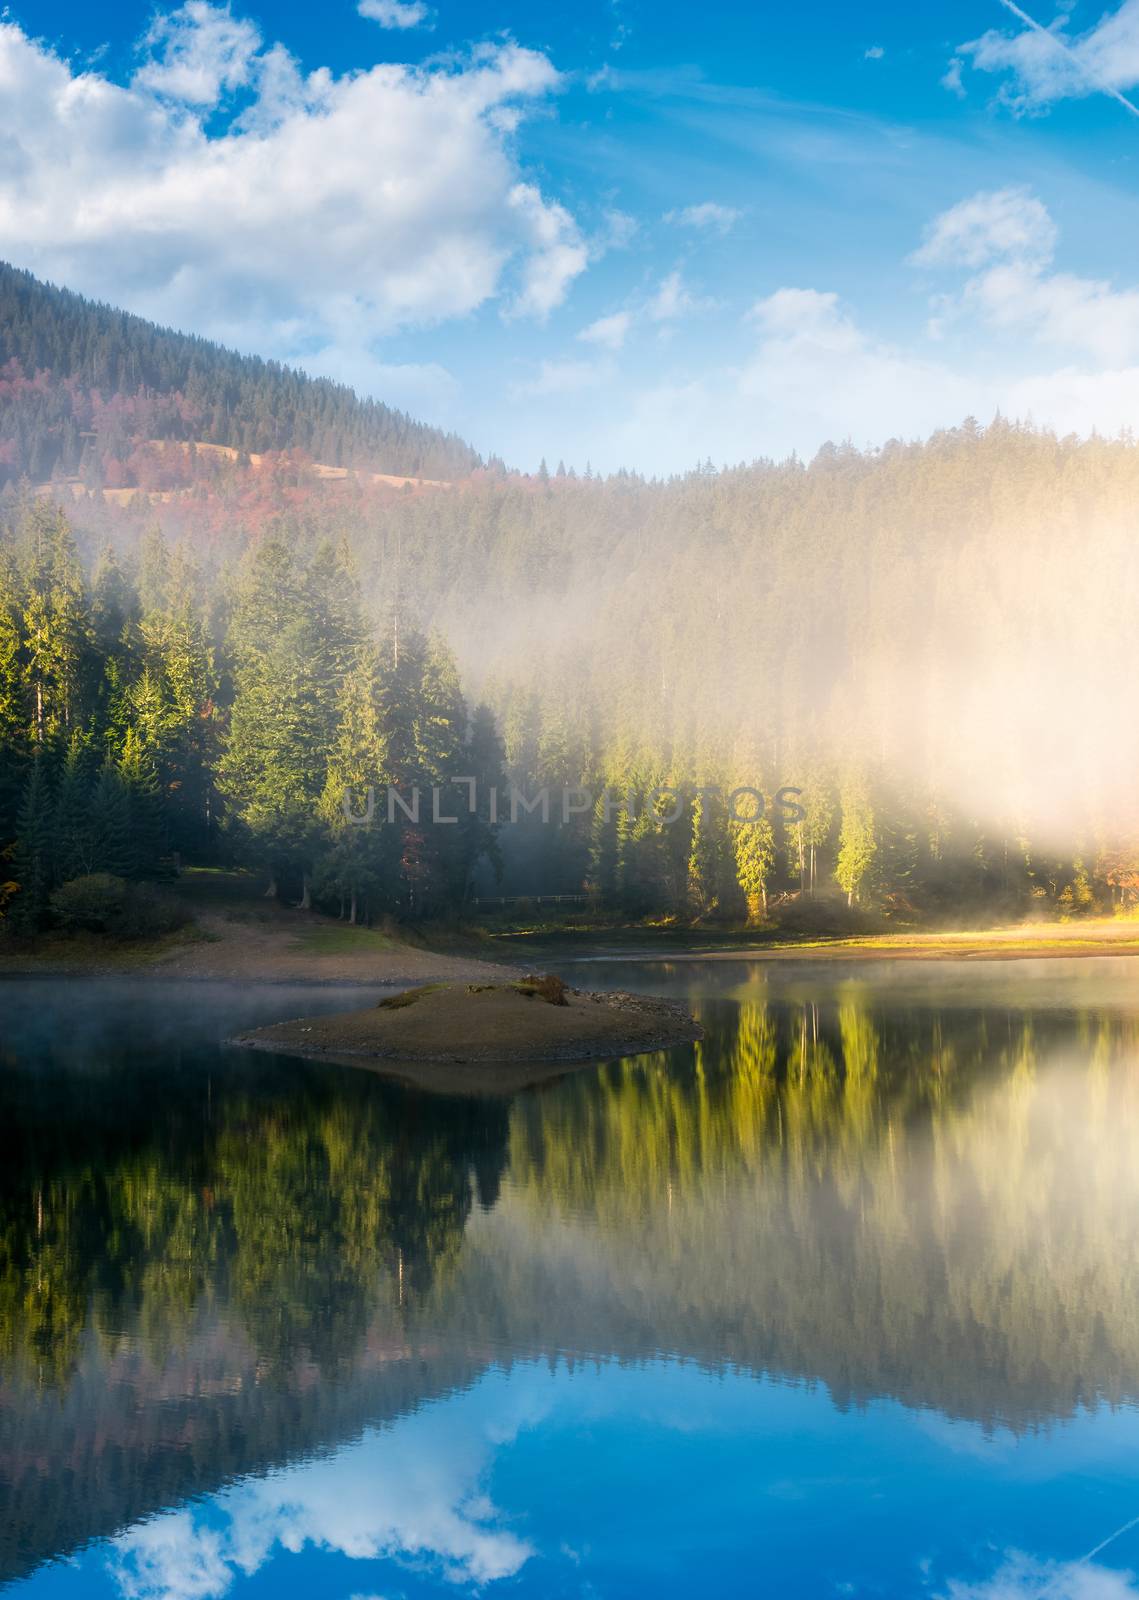 lake in spruce forest at foggy sunrise by Pellinni